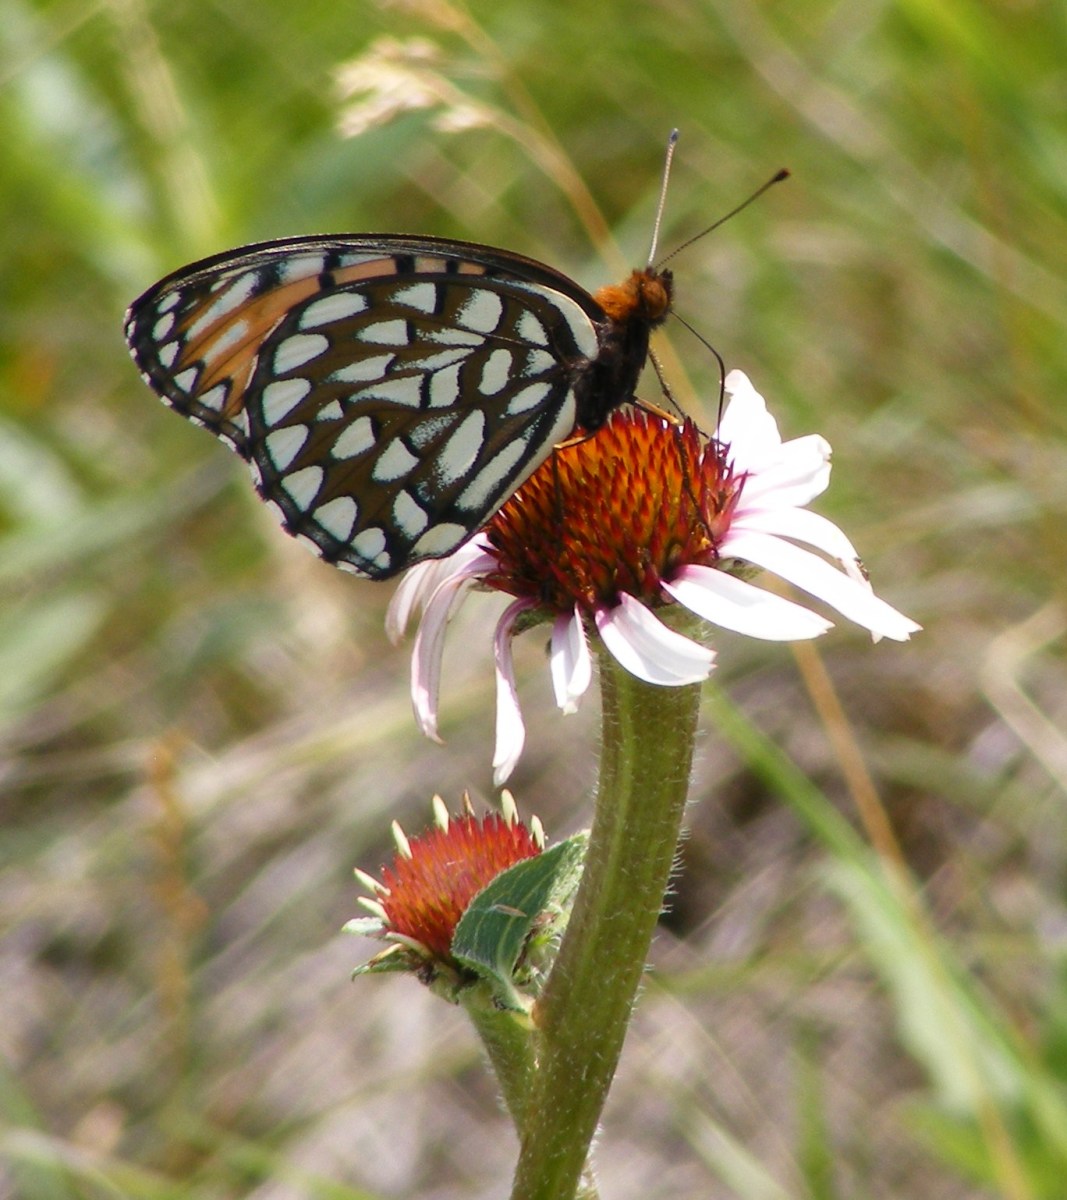 Native plants support wildlife, but what is the official definition of a native plant?